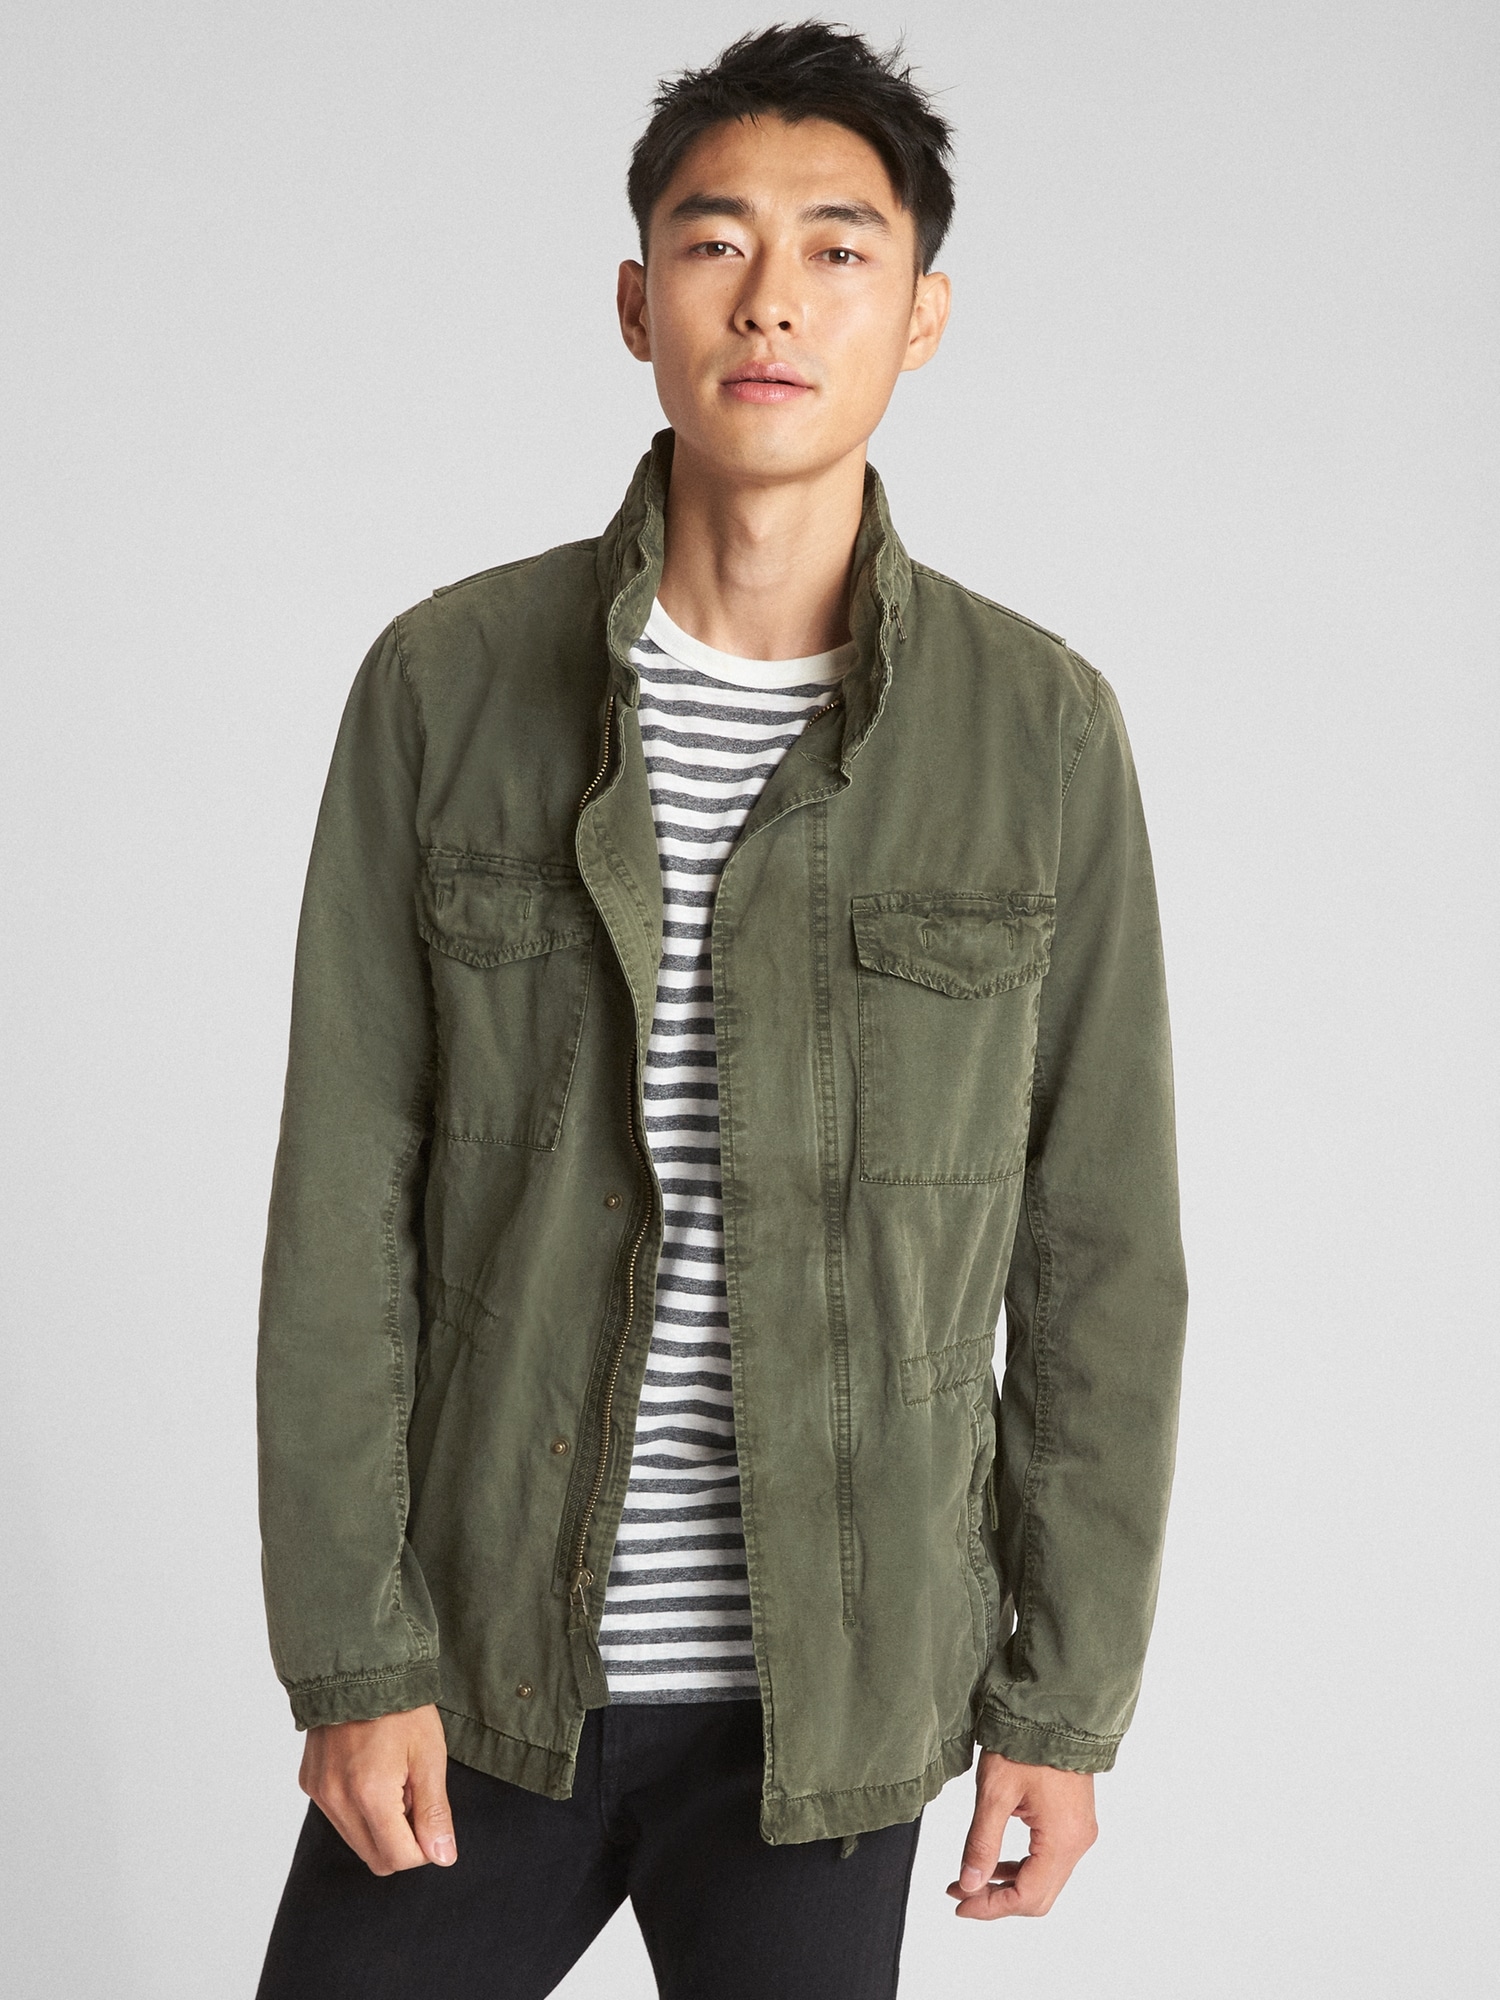 Gap US 45% Off Every Single Thing | Buyandship SG | Shop Worldwide and ...